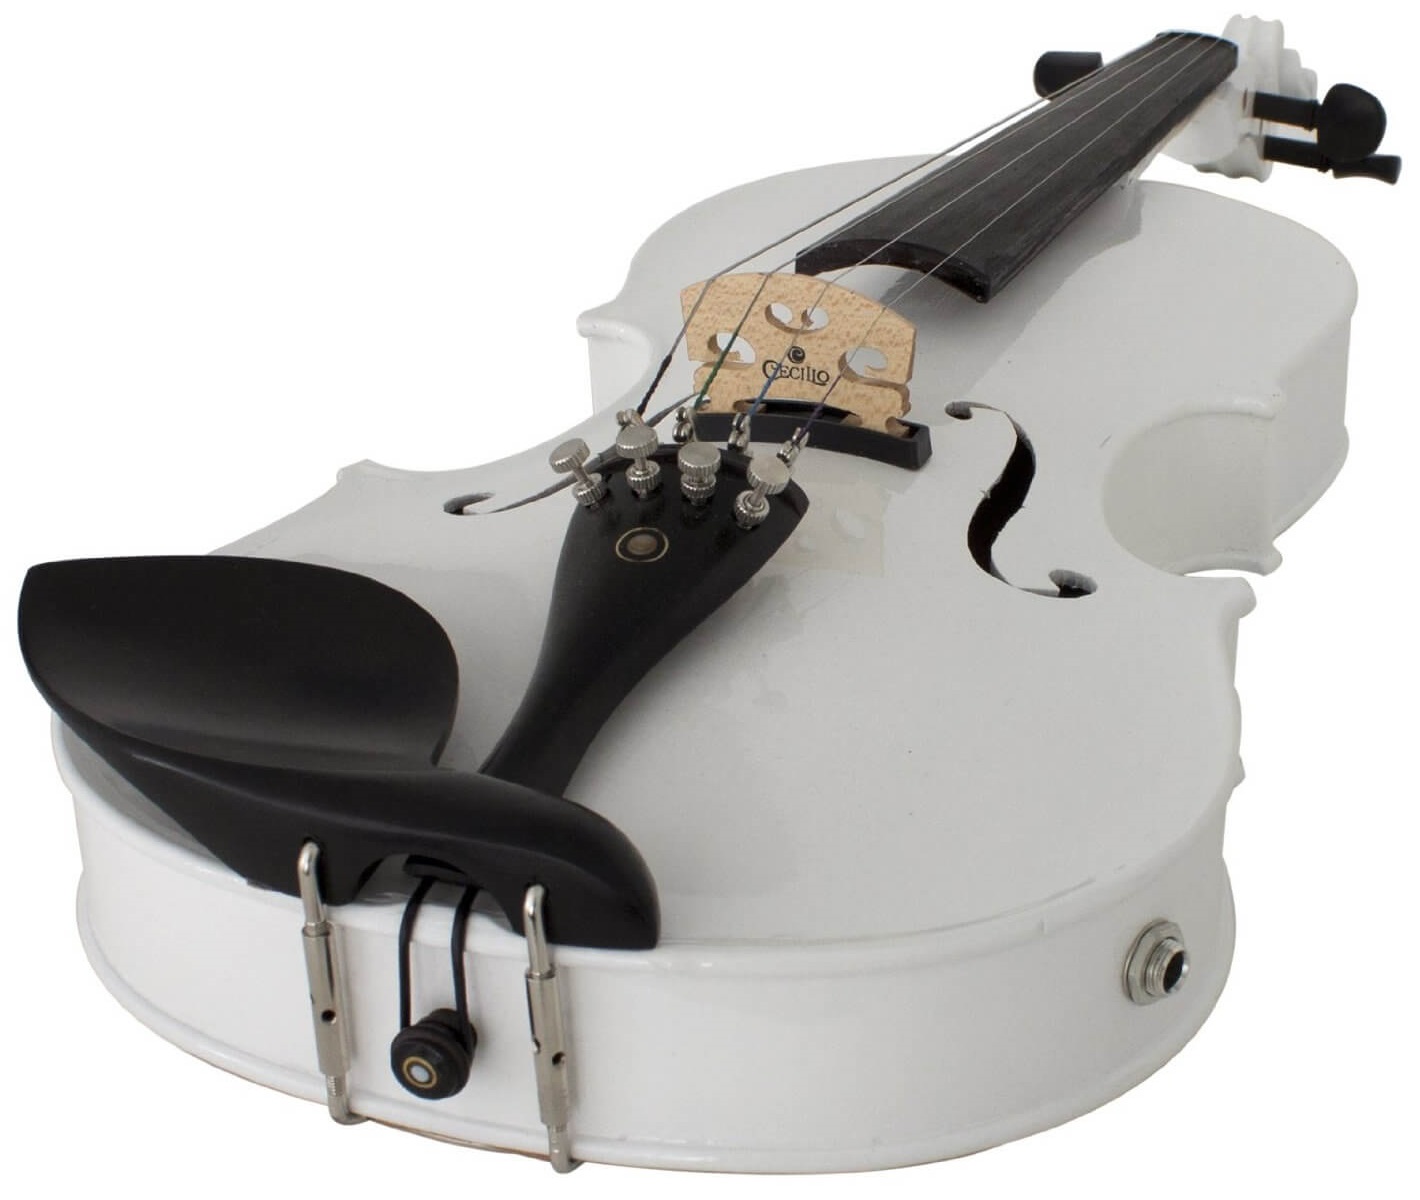 what to consider before buying the perfect cecilio kids violin